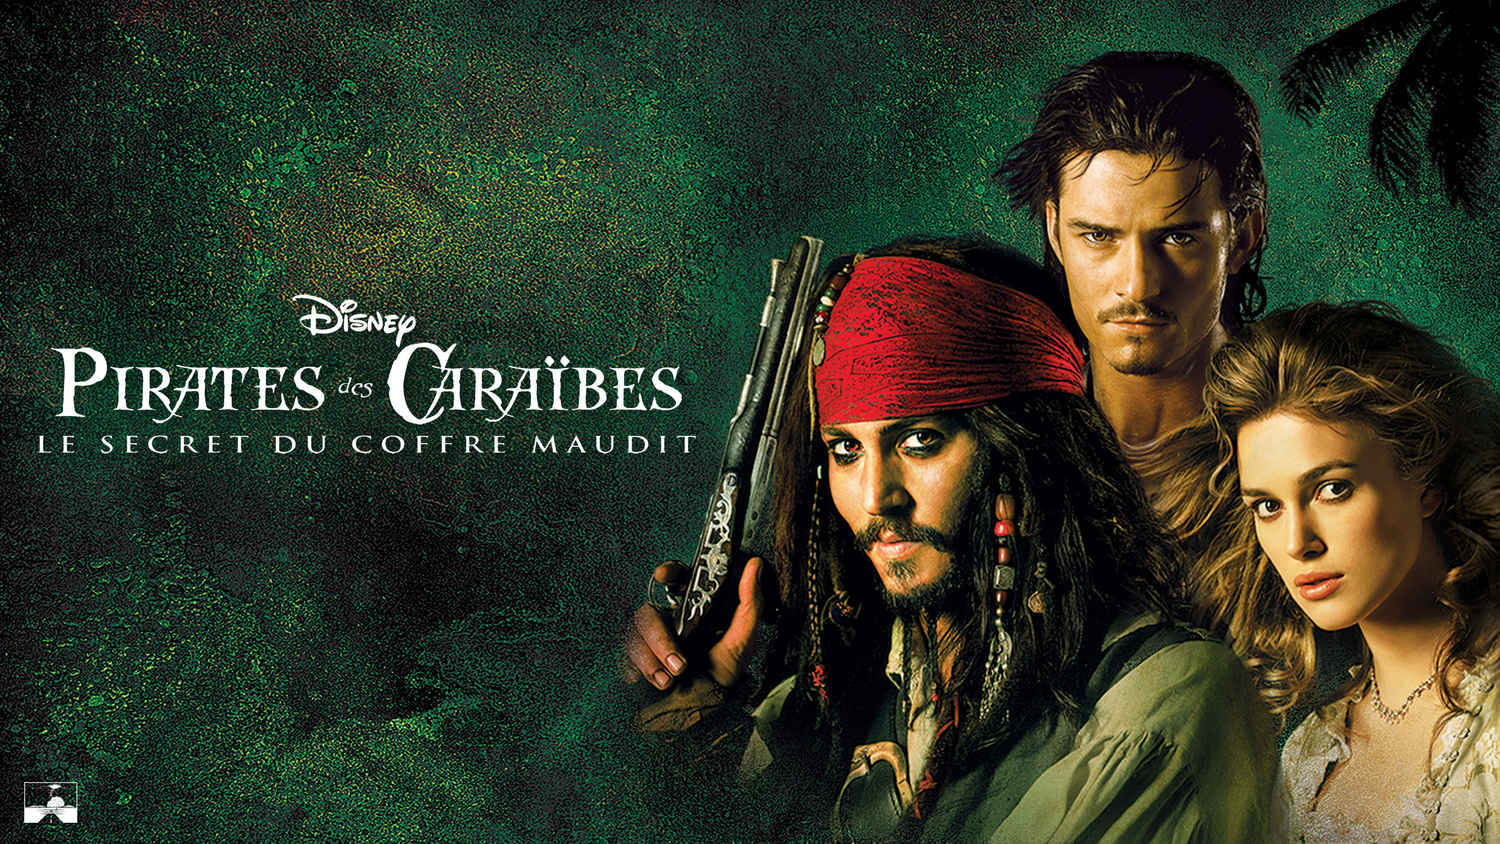 watch pirates of the caribbean 5 online 123movies